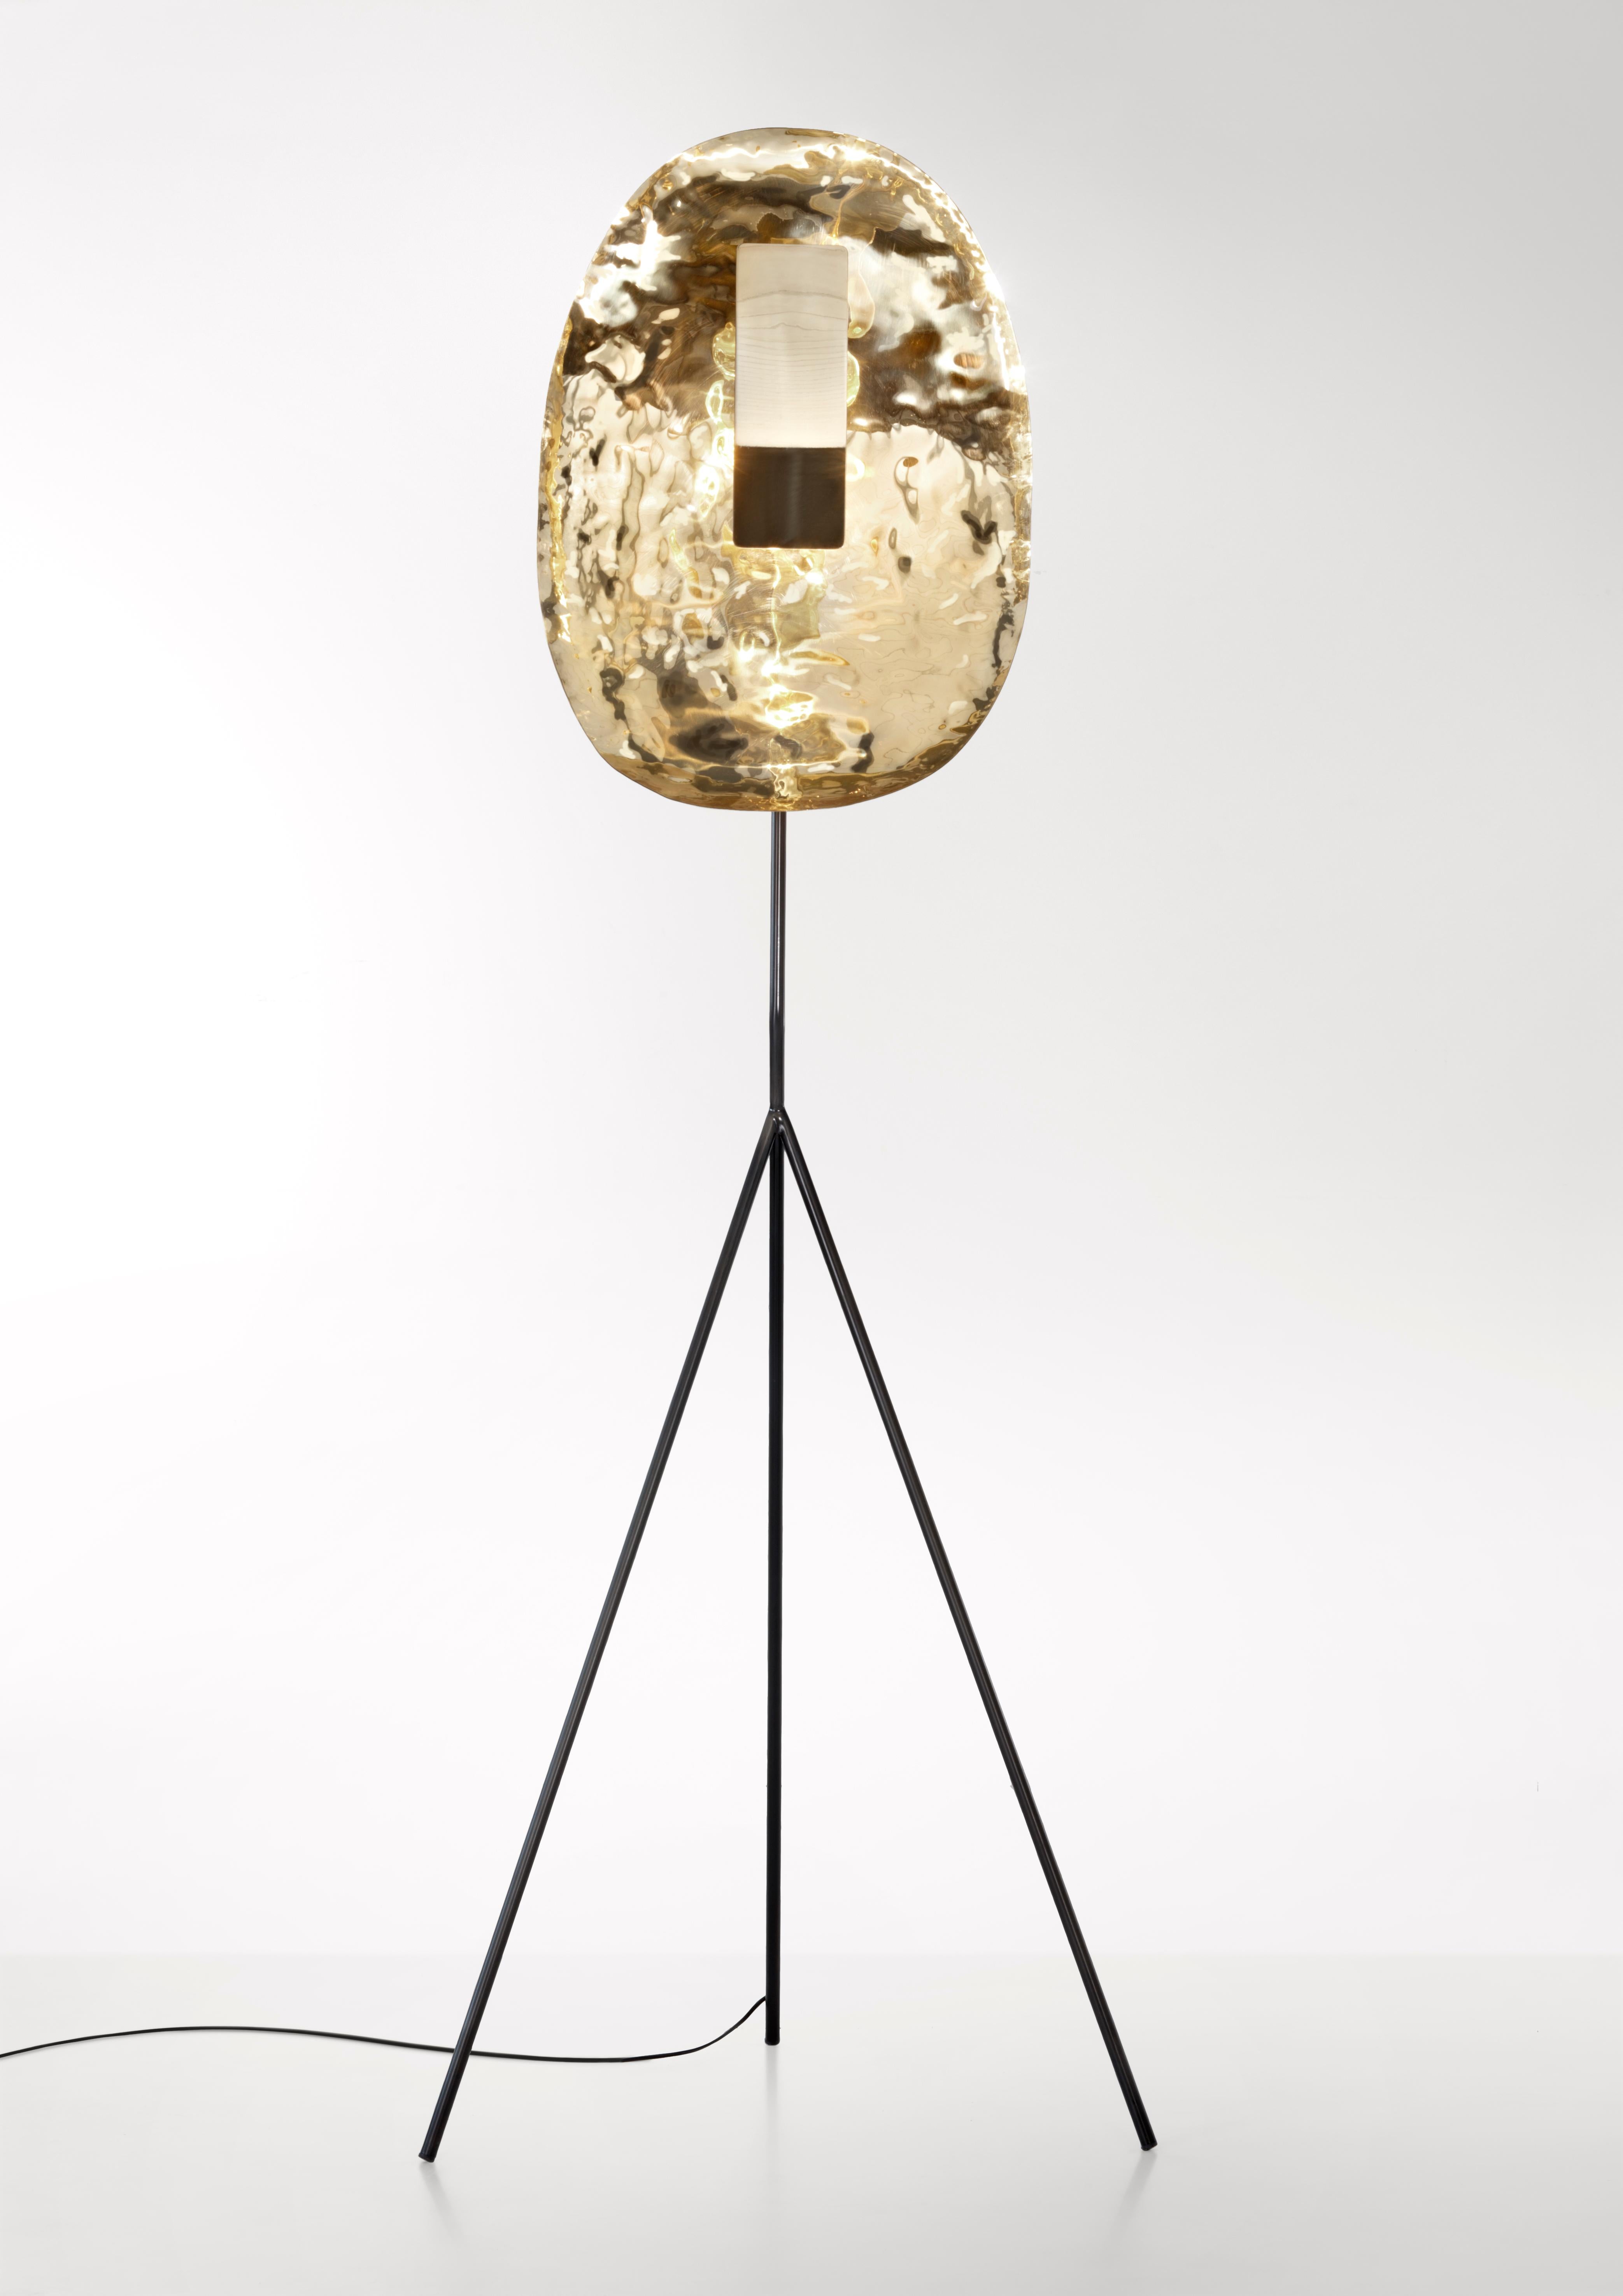 A flowing, sensible presence, delicately balanced. A sculptural object composed of a hand-hammered brass diffuser, metal that still seems to radiate the energy of the tool that shaped it. Light, originating from a LED source, is reflected as if it